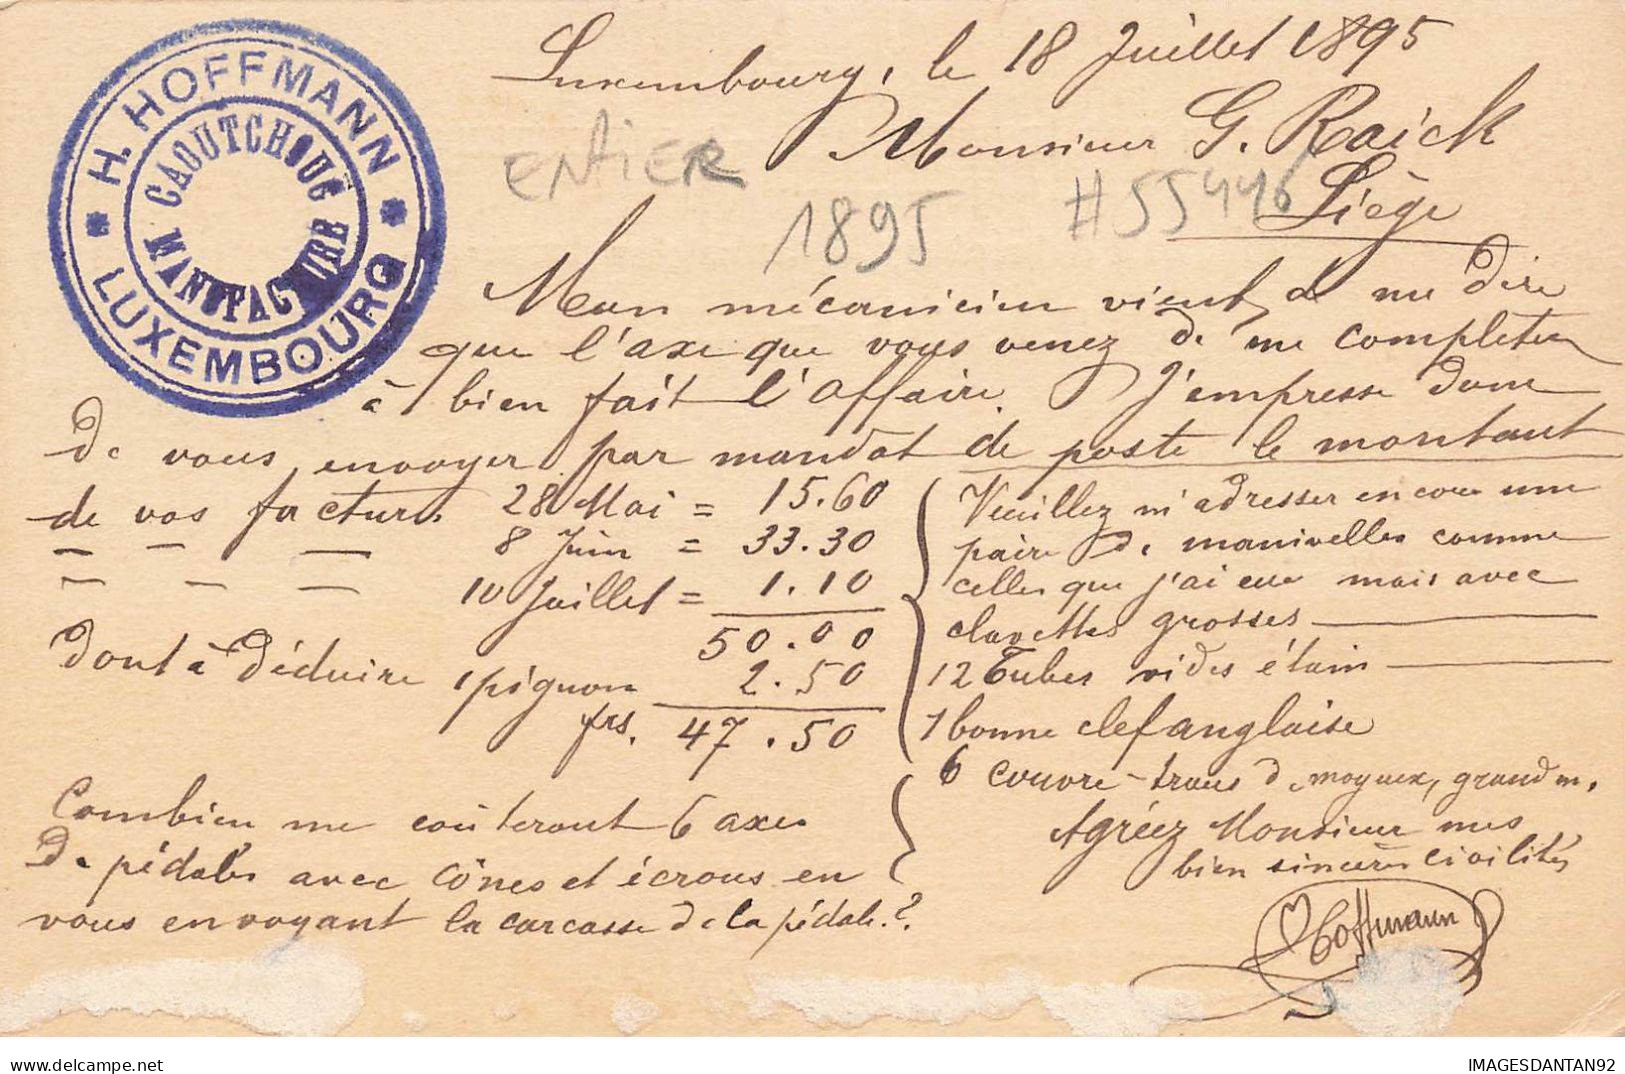 ENTIER #FG55446 LUXEMBOURG HOFFMANN CAOUTCHOUC 1895 - Stamped Stationery